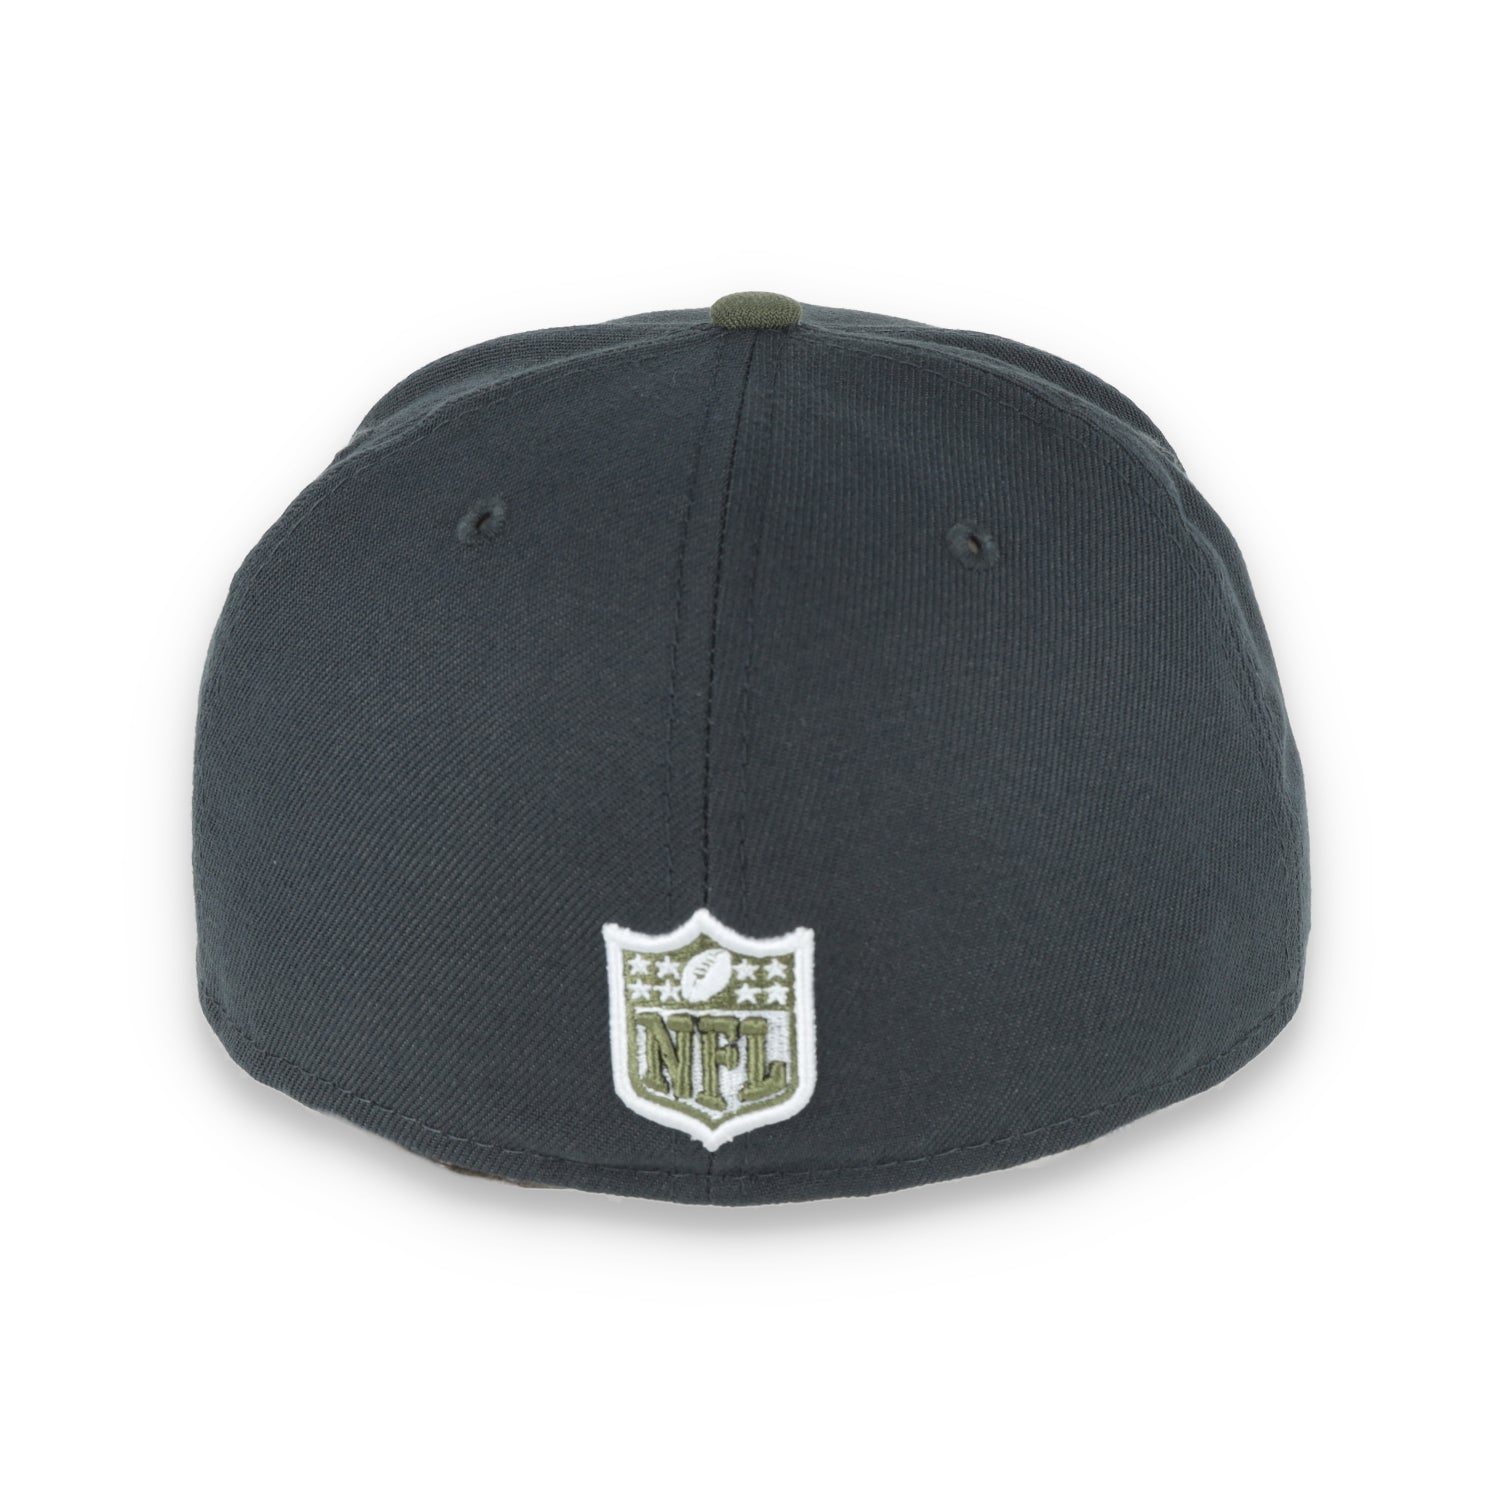 NEW ERA SAN FRANCISCO 49ERS 59FIFTY COLOR PACK FITTED -GREY/OLIVE